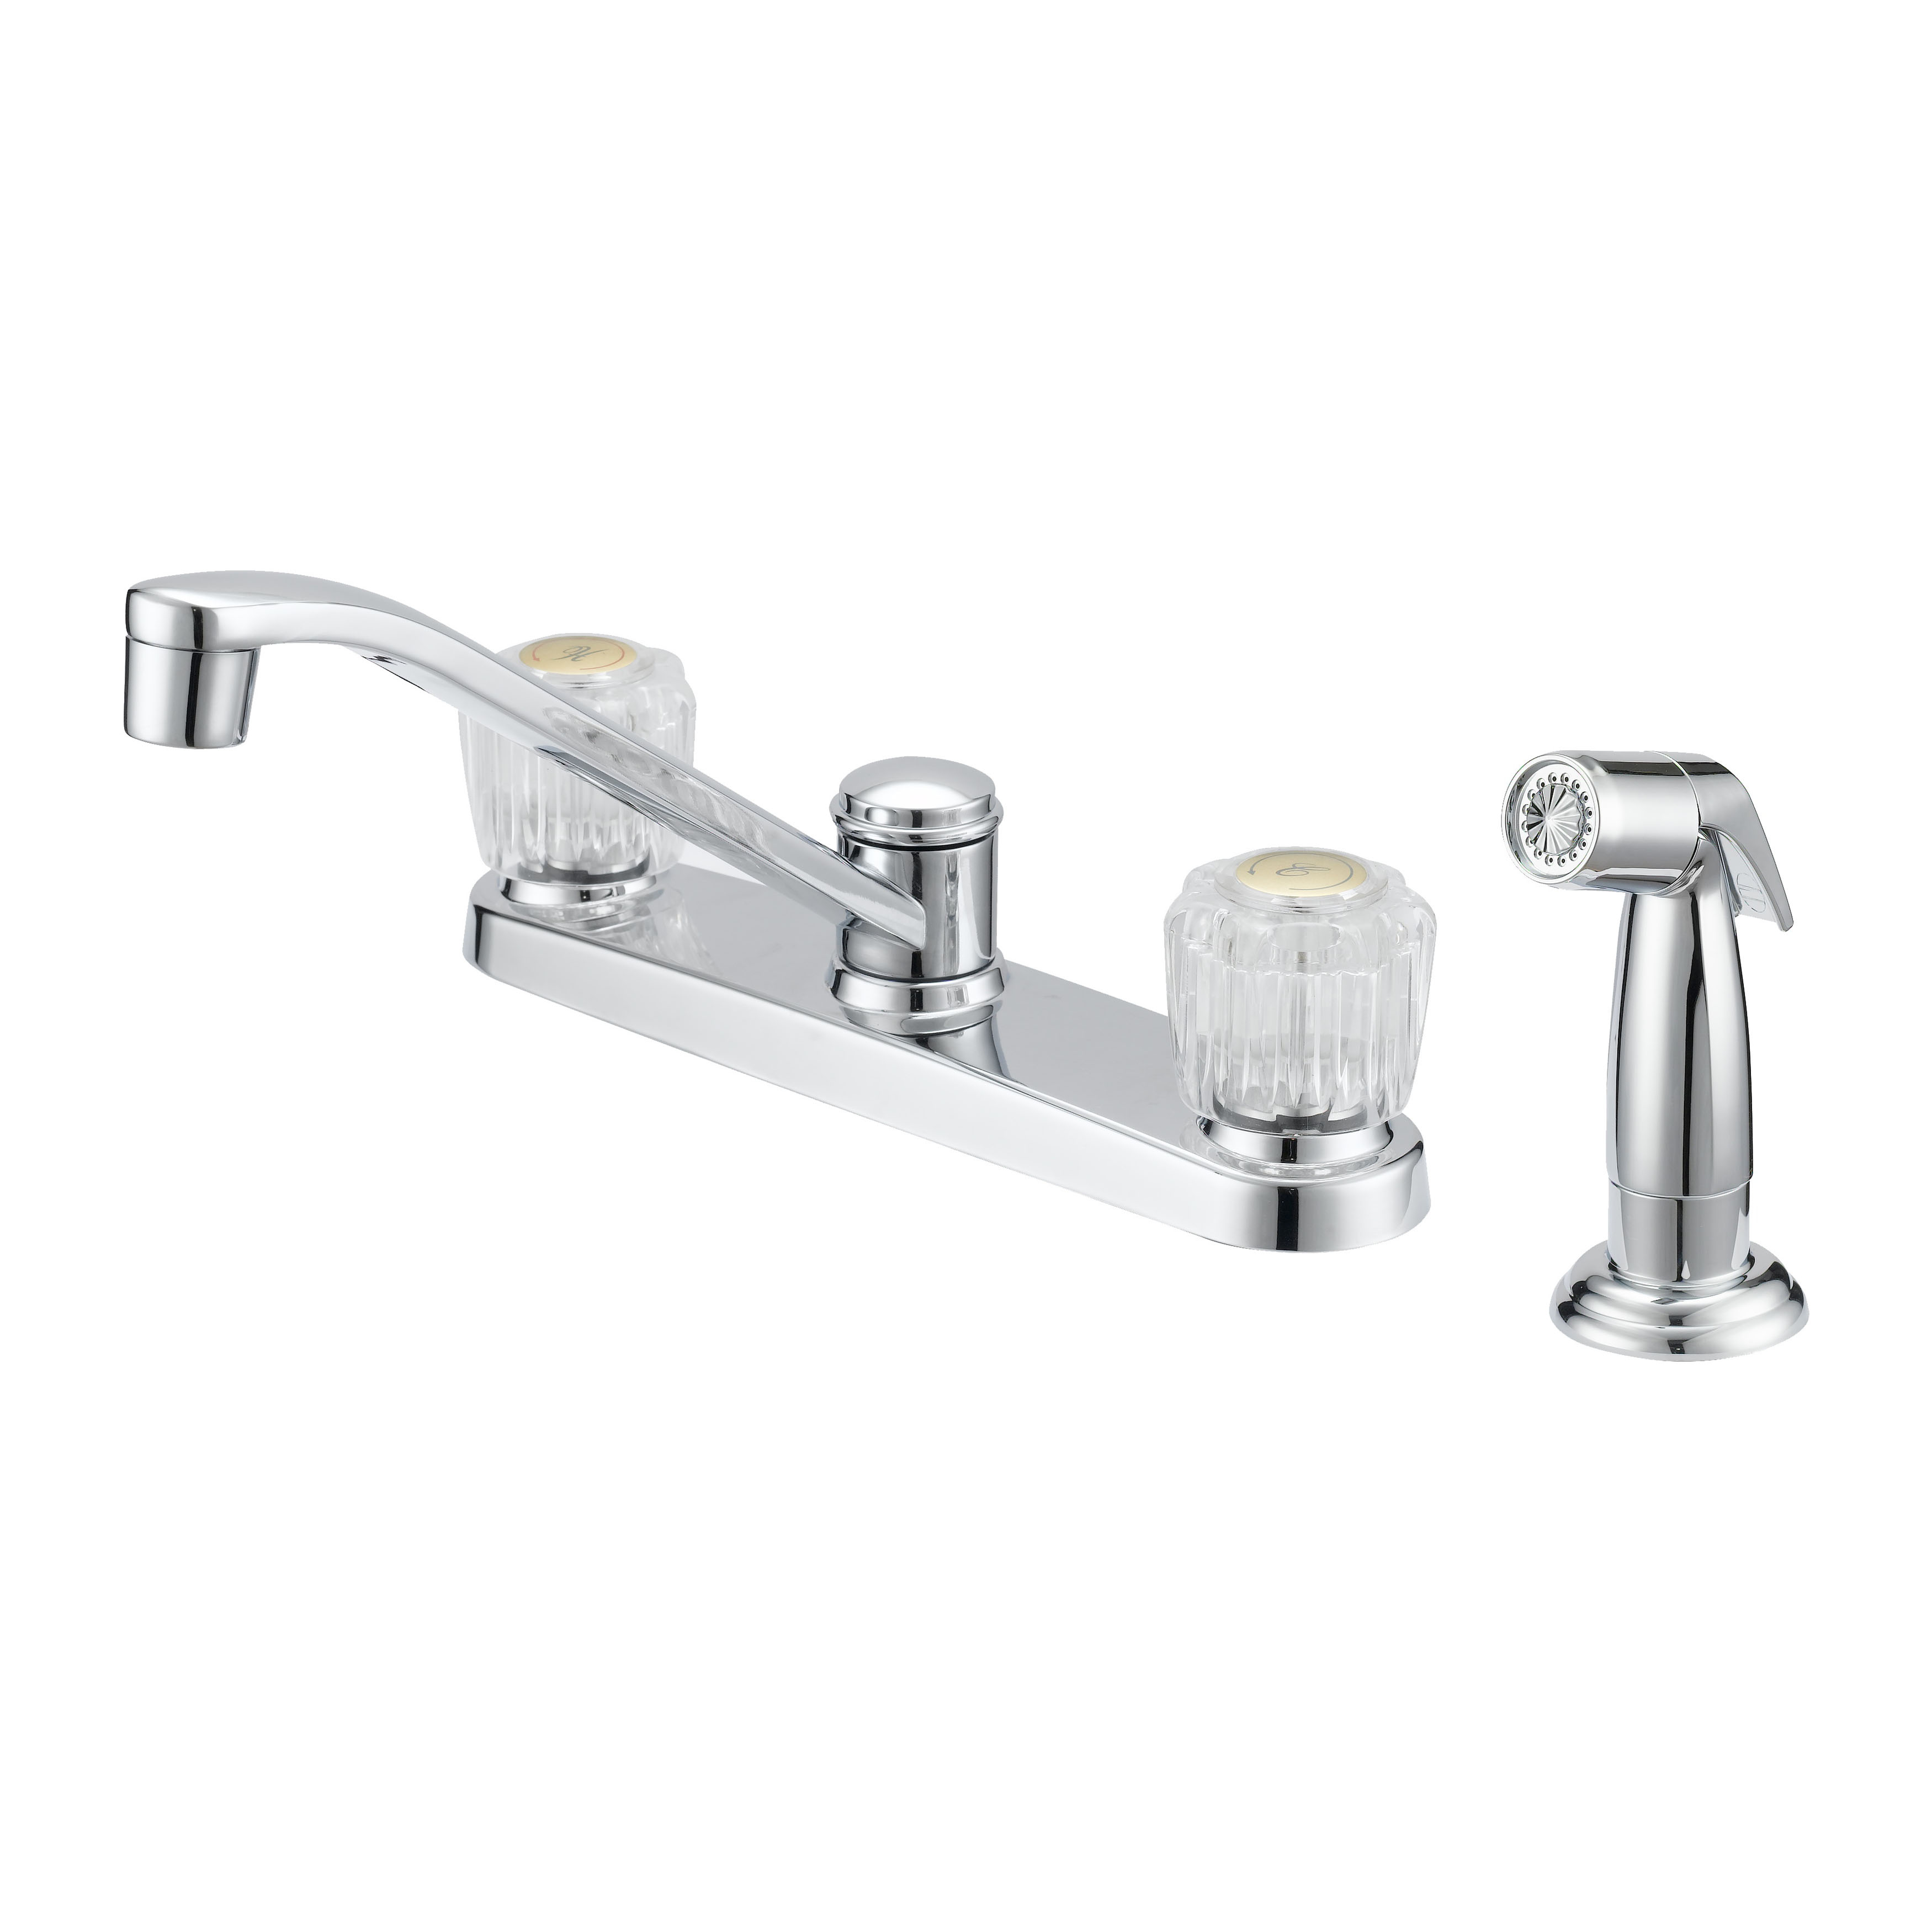 F8F10041CP Kitchen Faucet, 1.8 gpm, 2-Faucet Handle, 4-Faucet Hole, Metal/Plastic, Chrome Plated